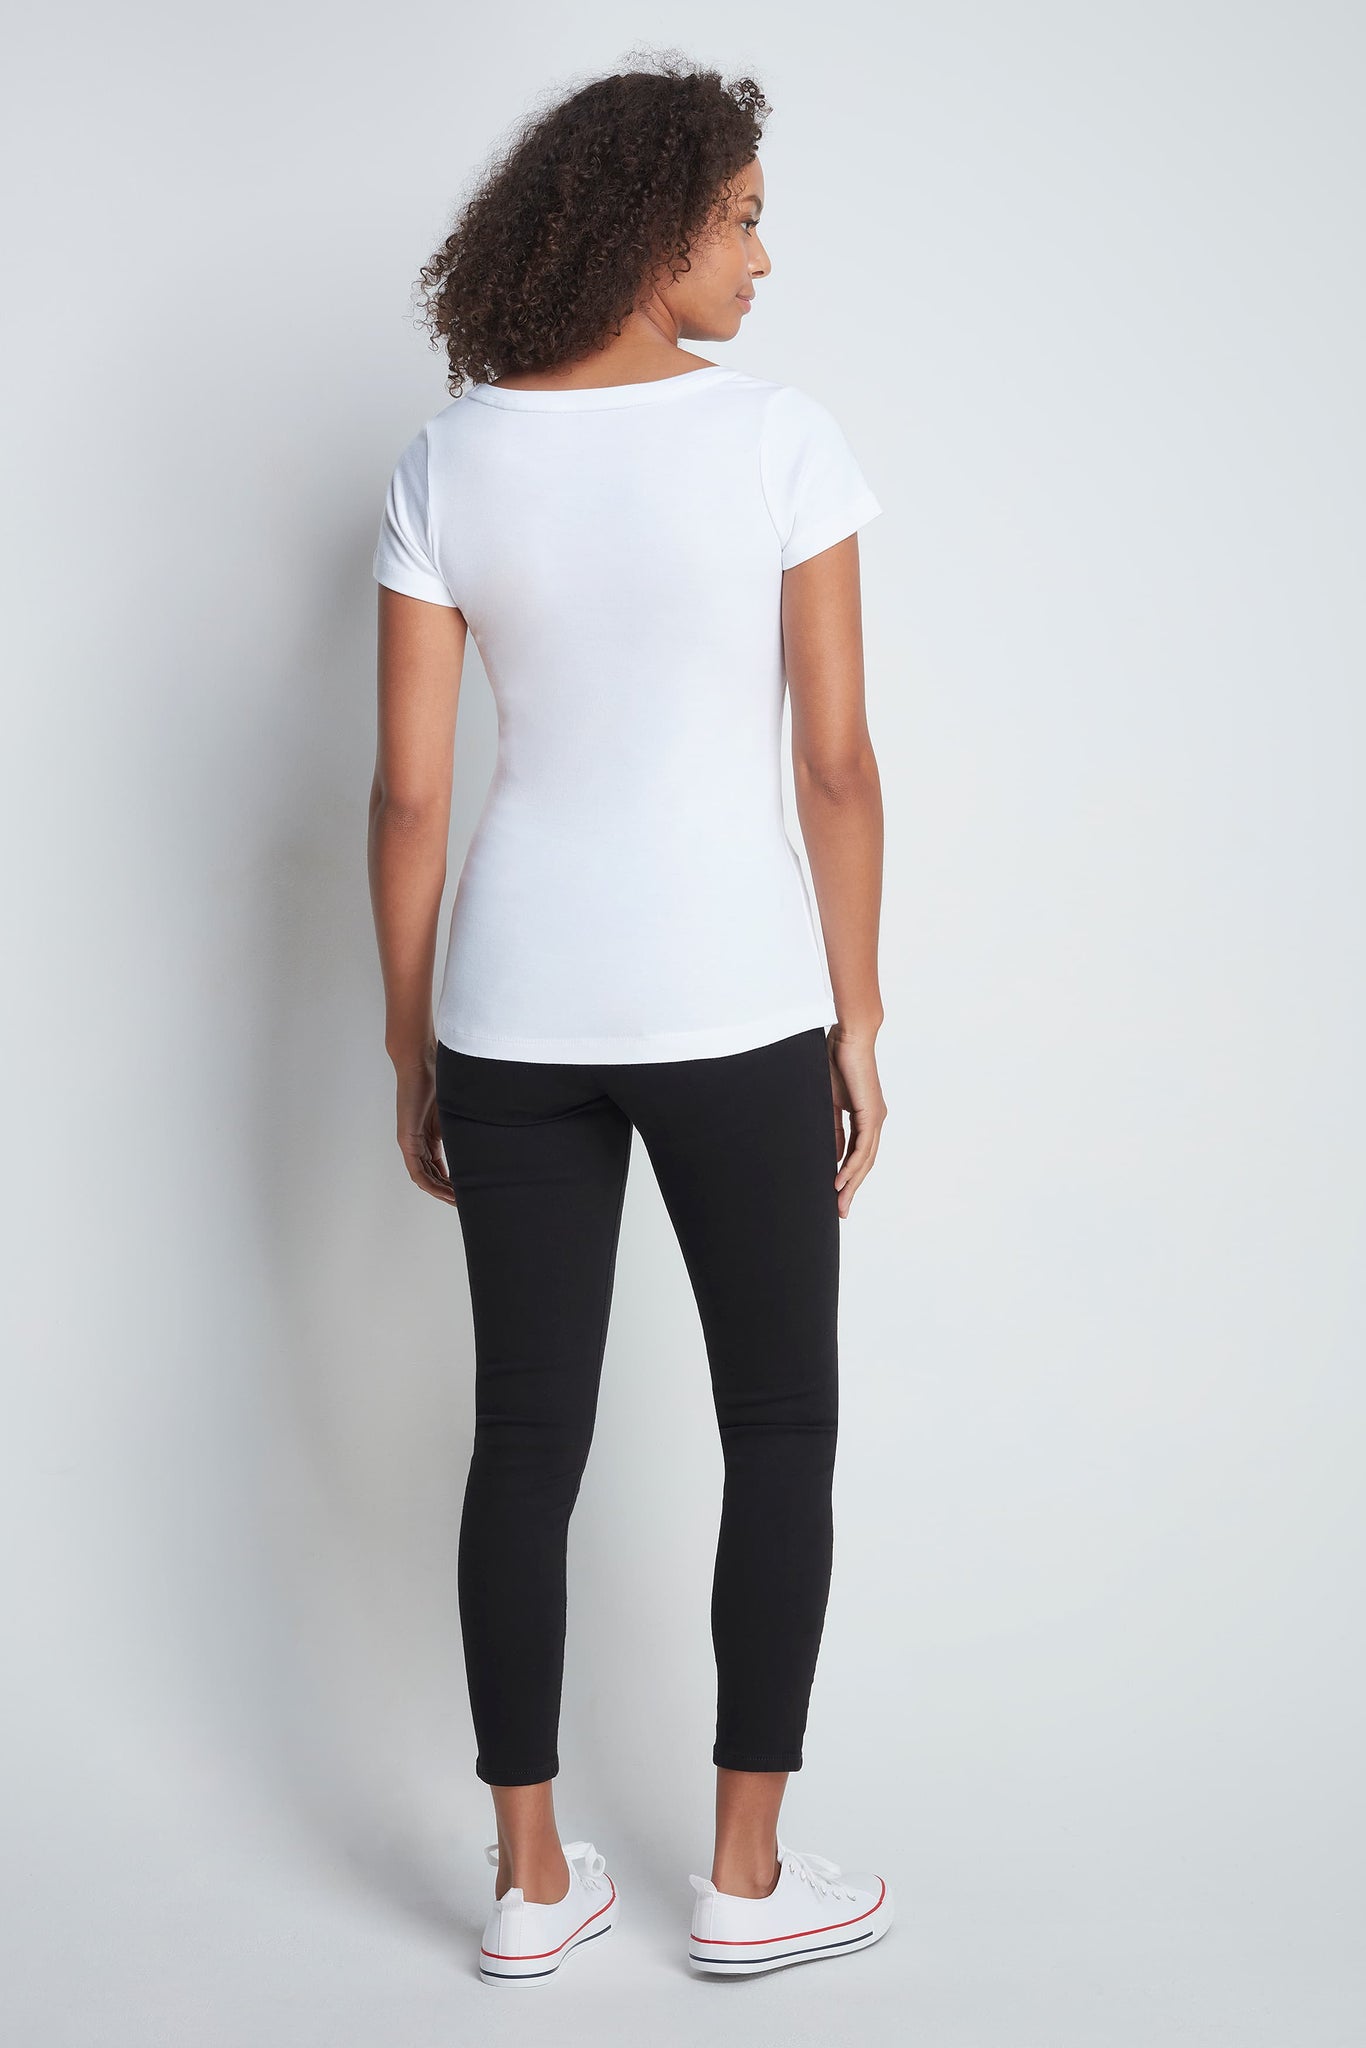 Quality Scoop Neck Cotton Modal Blend Short Sleeve T-Shirt in White by Lavender Hill Clothing